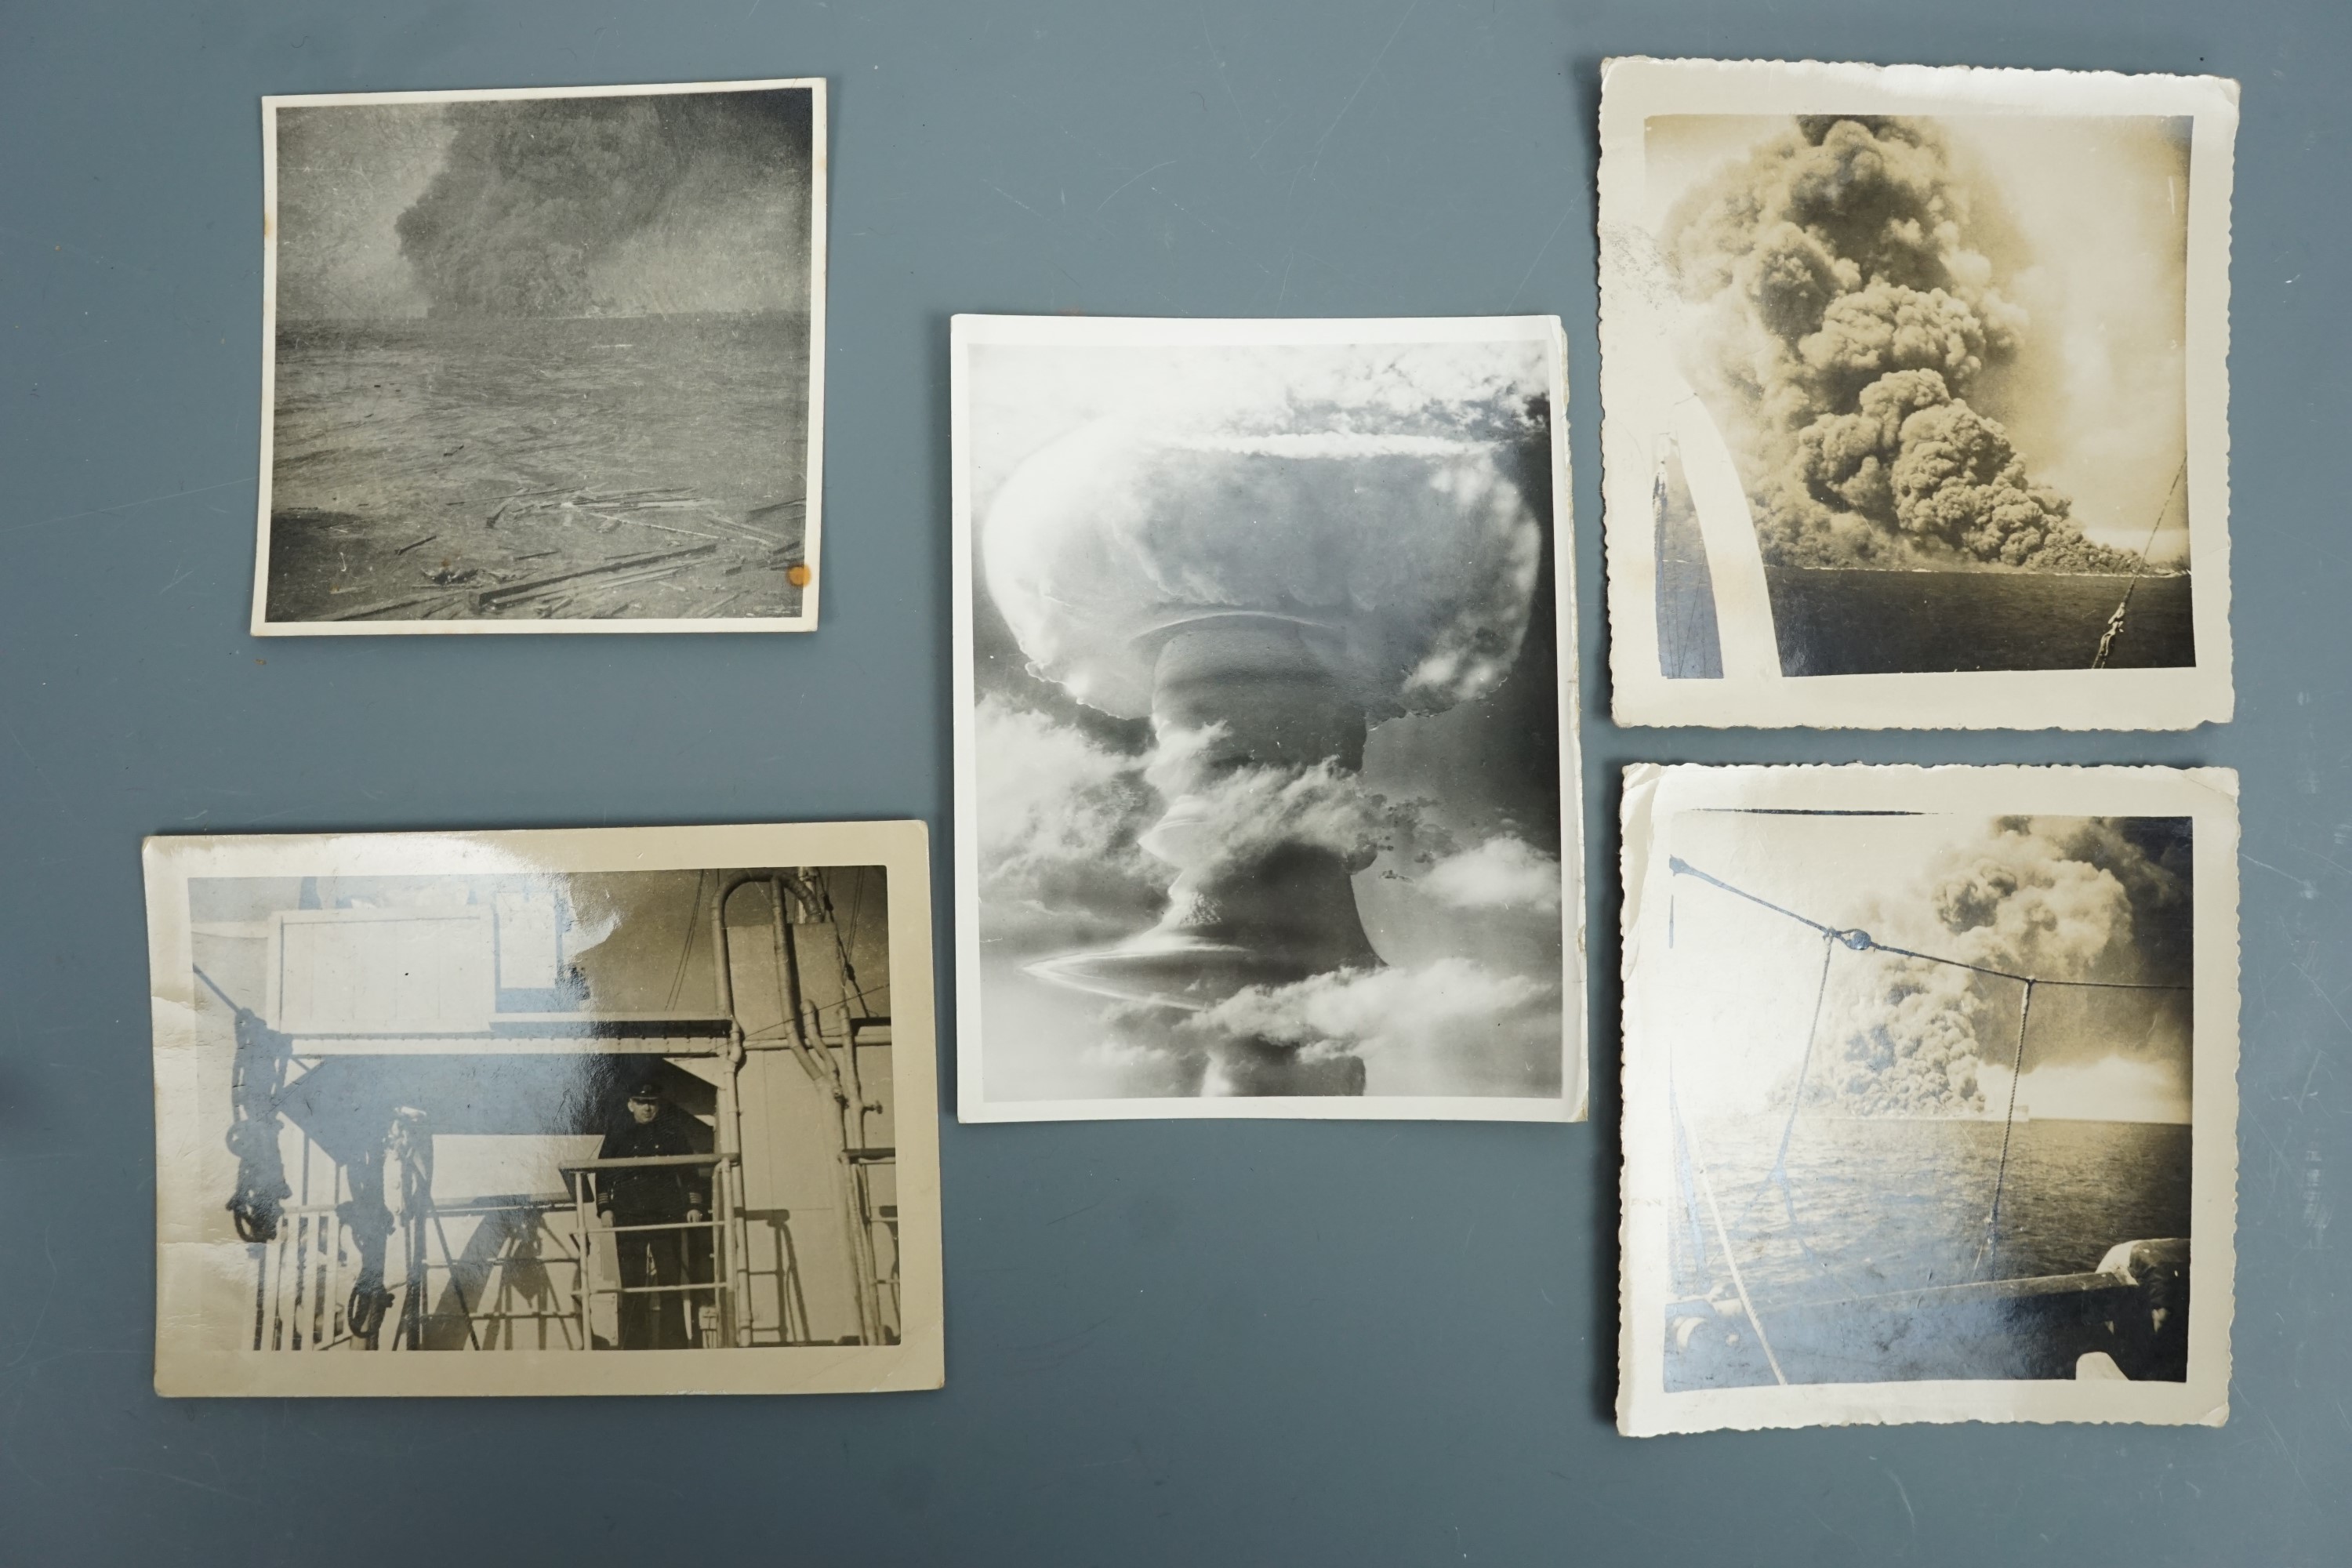 Period unofficial photographs of the sinking of the tanker Empire Gold following shelling by the